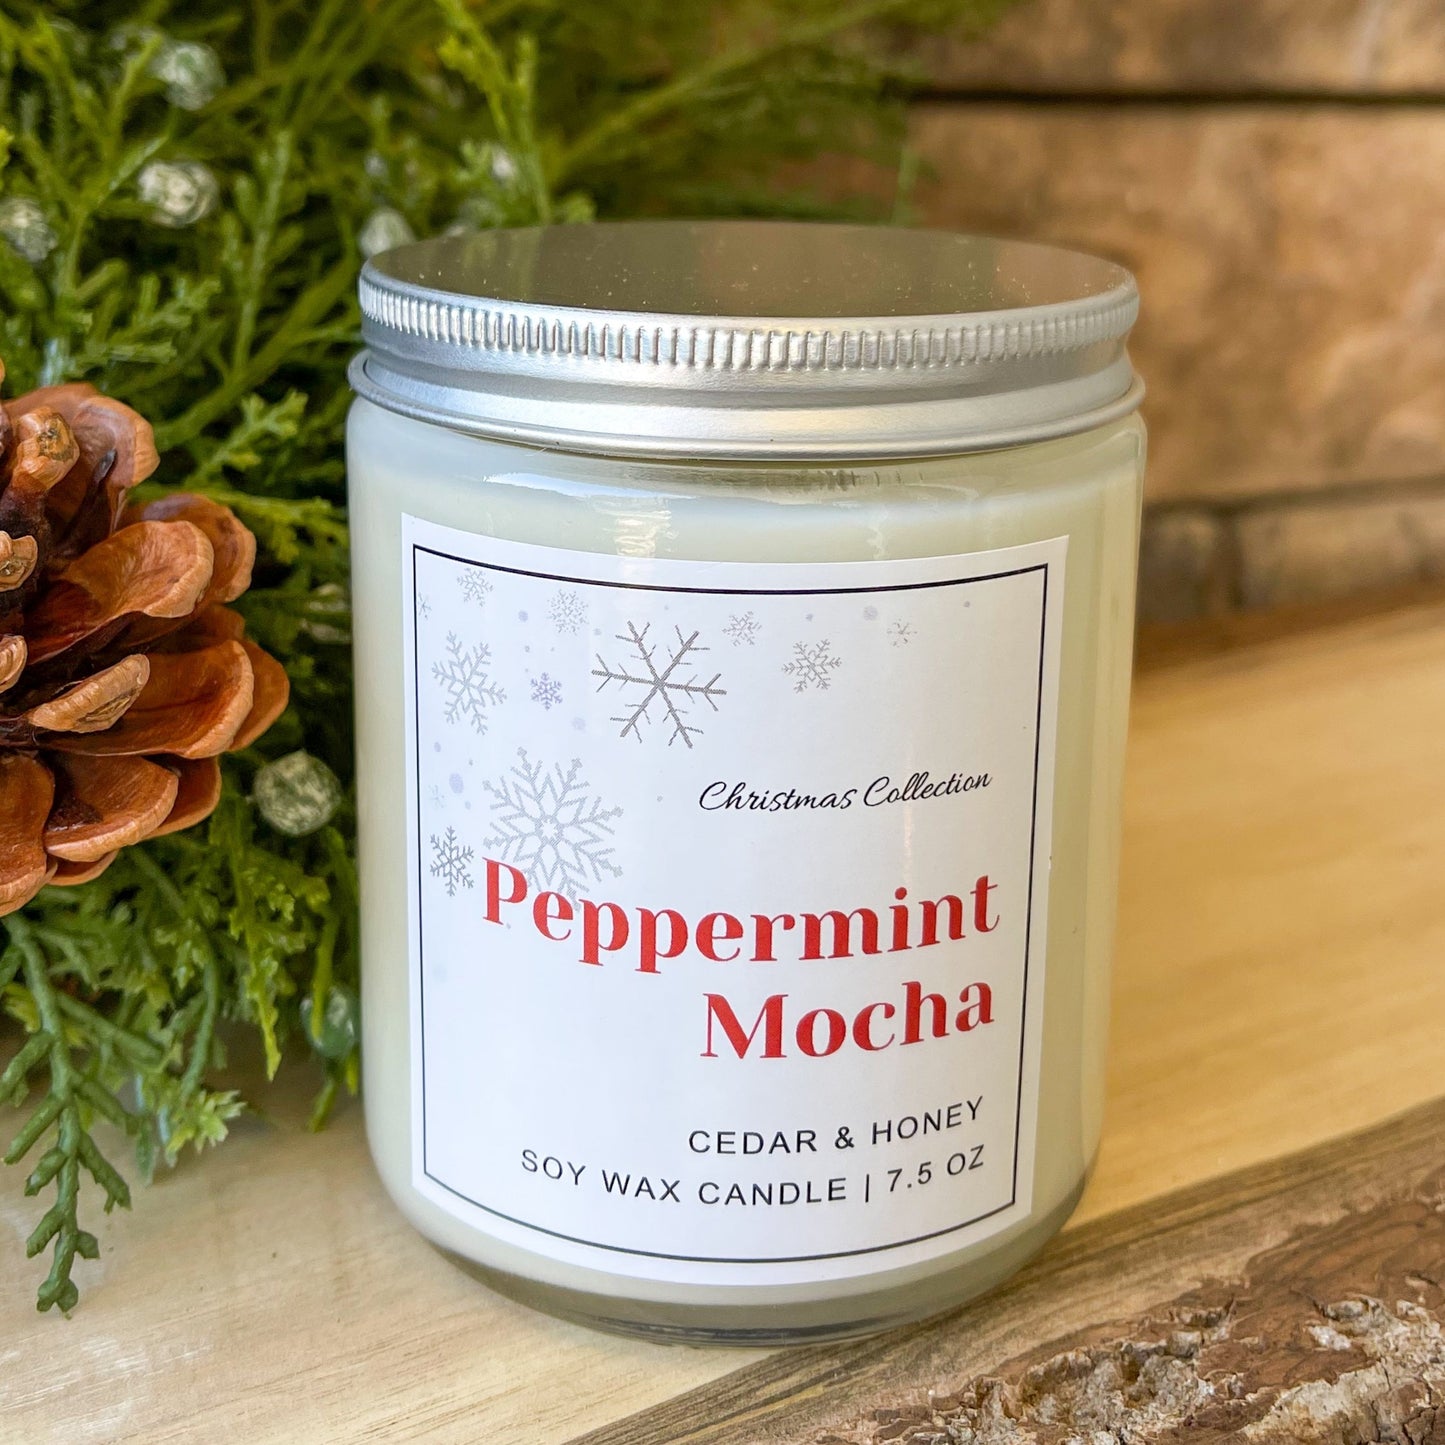 Peppermint Mocha scented soy jar candle